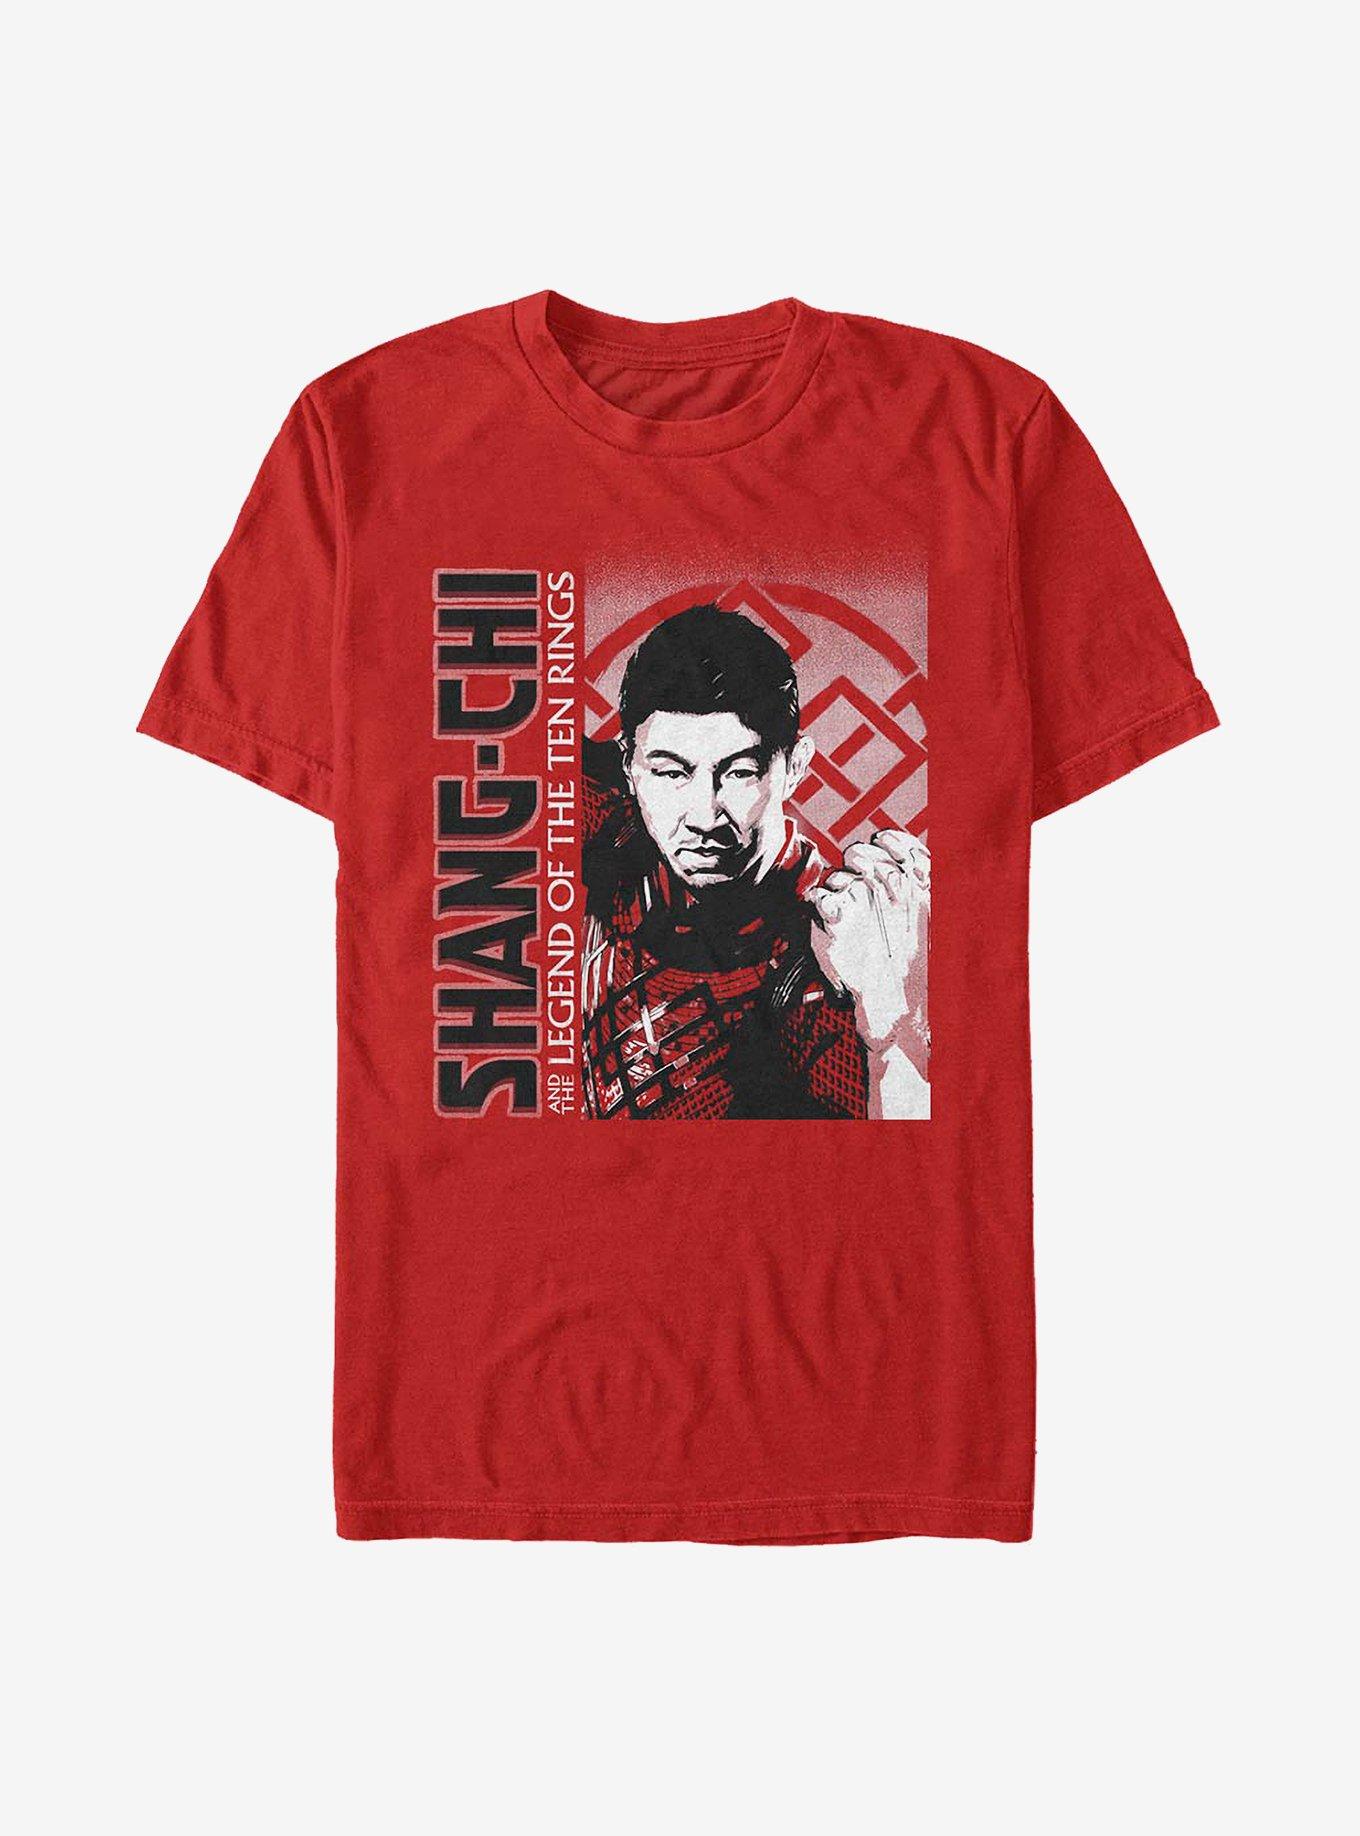 Marvel Shang-Chi And The Legend Of The Ten Rings Chi Focus T-Shirt, RED, hi-res